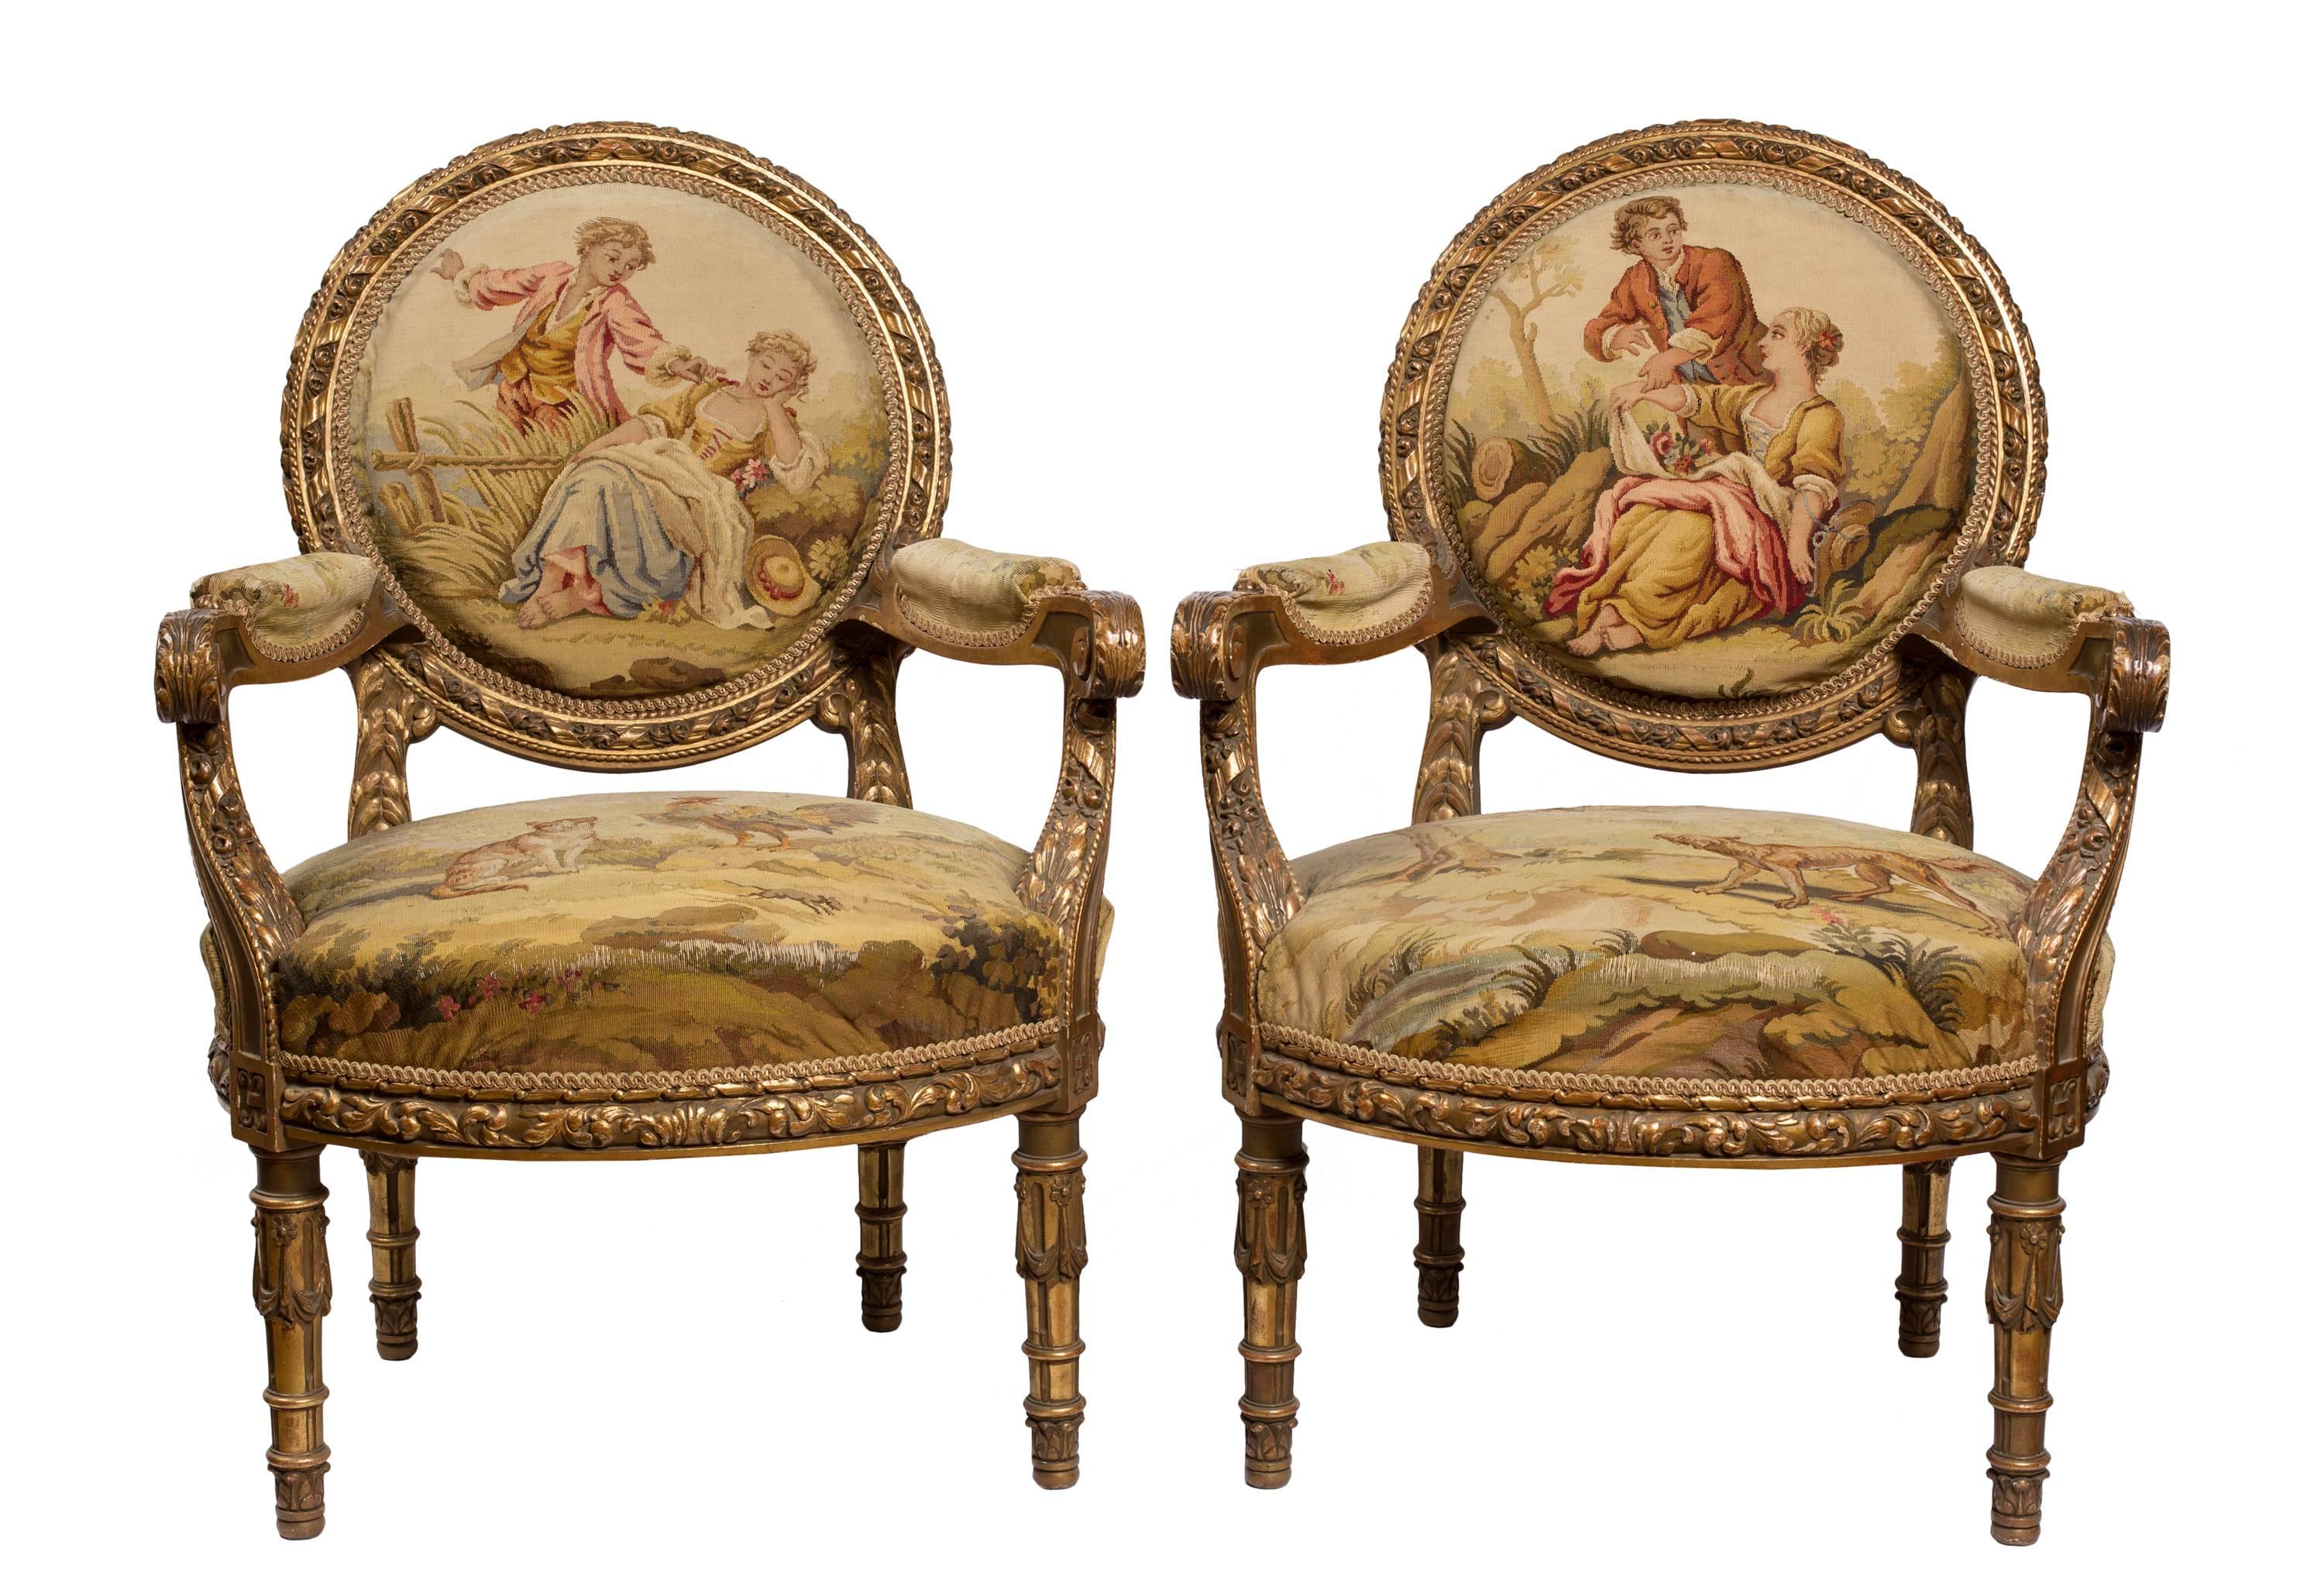 Tapestry 19th Century French Aubusson Carved Giltwood Salon Suite with Settee and Chairs